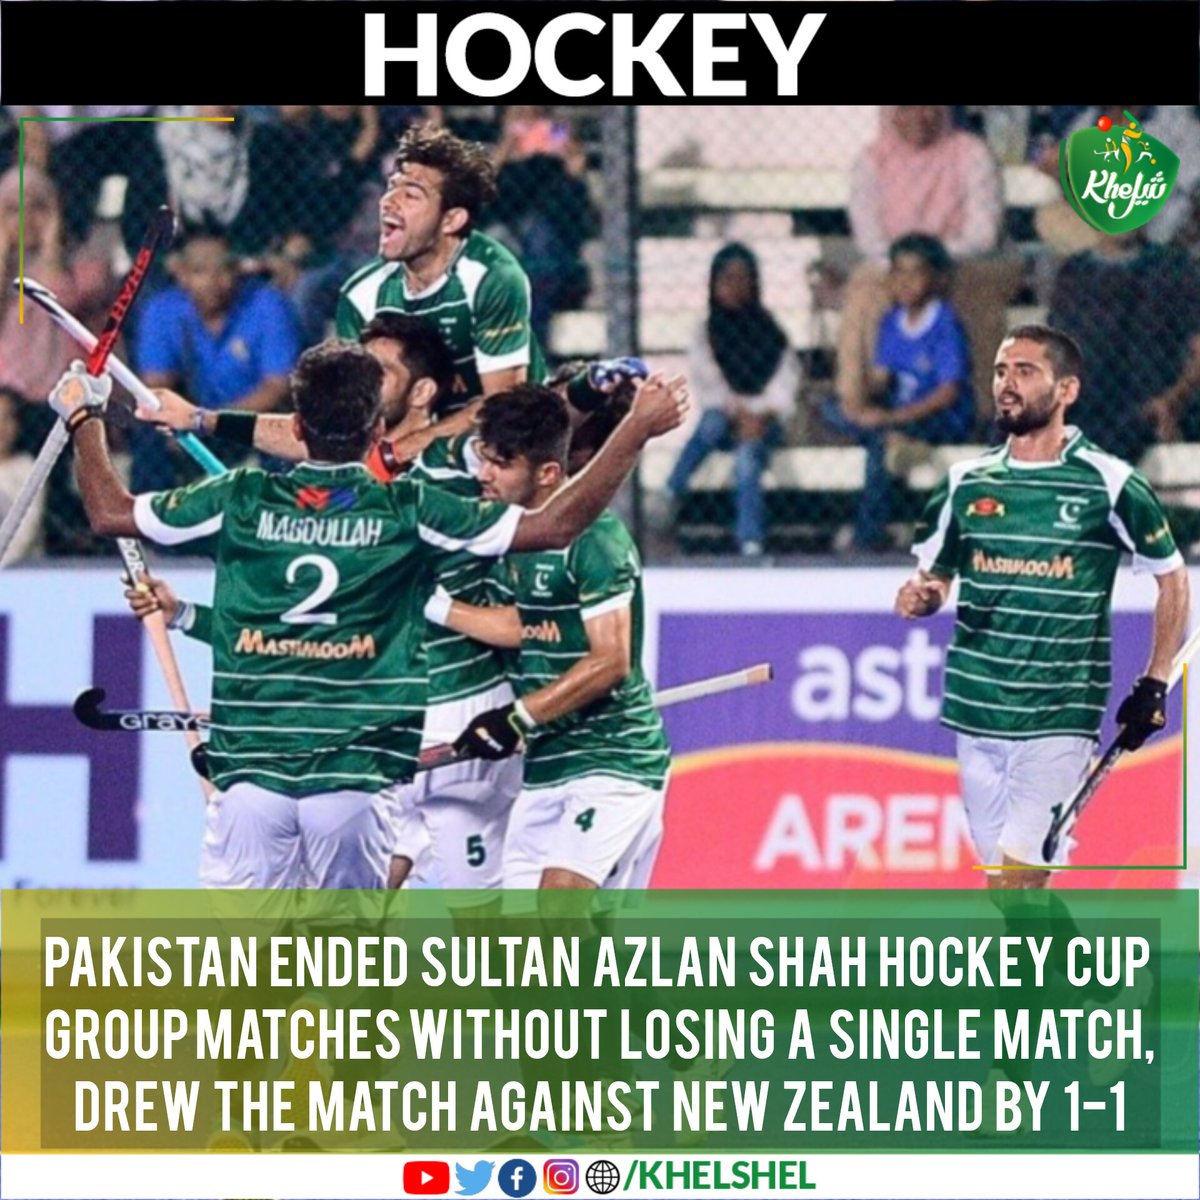 What a performance by the boys in green, Pakistan will face Japan in the final of #SultanAzlanShahHockeyCup tomorrow. #Hockey | #Pakistan | #AmmadButt | #Malaysia | #BackTheBoysInGreen